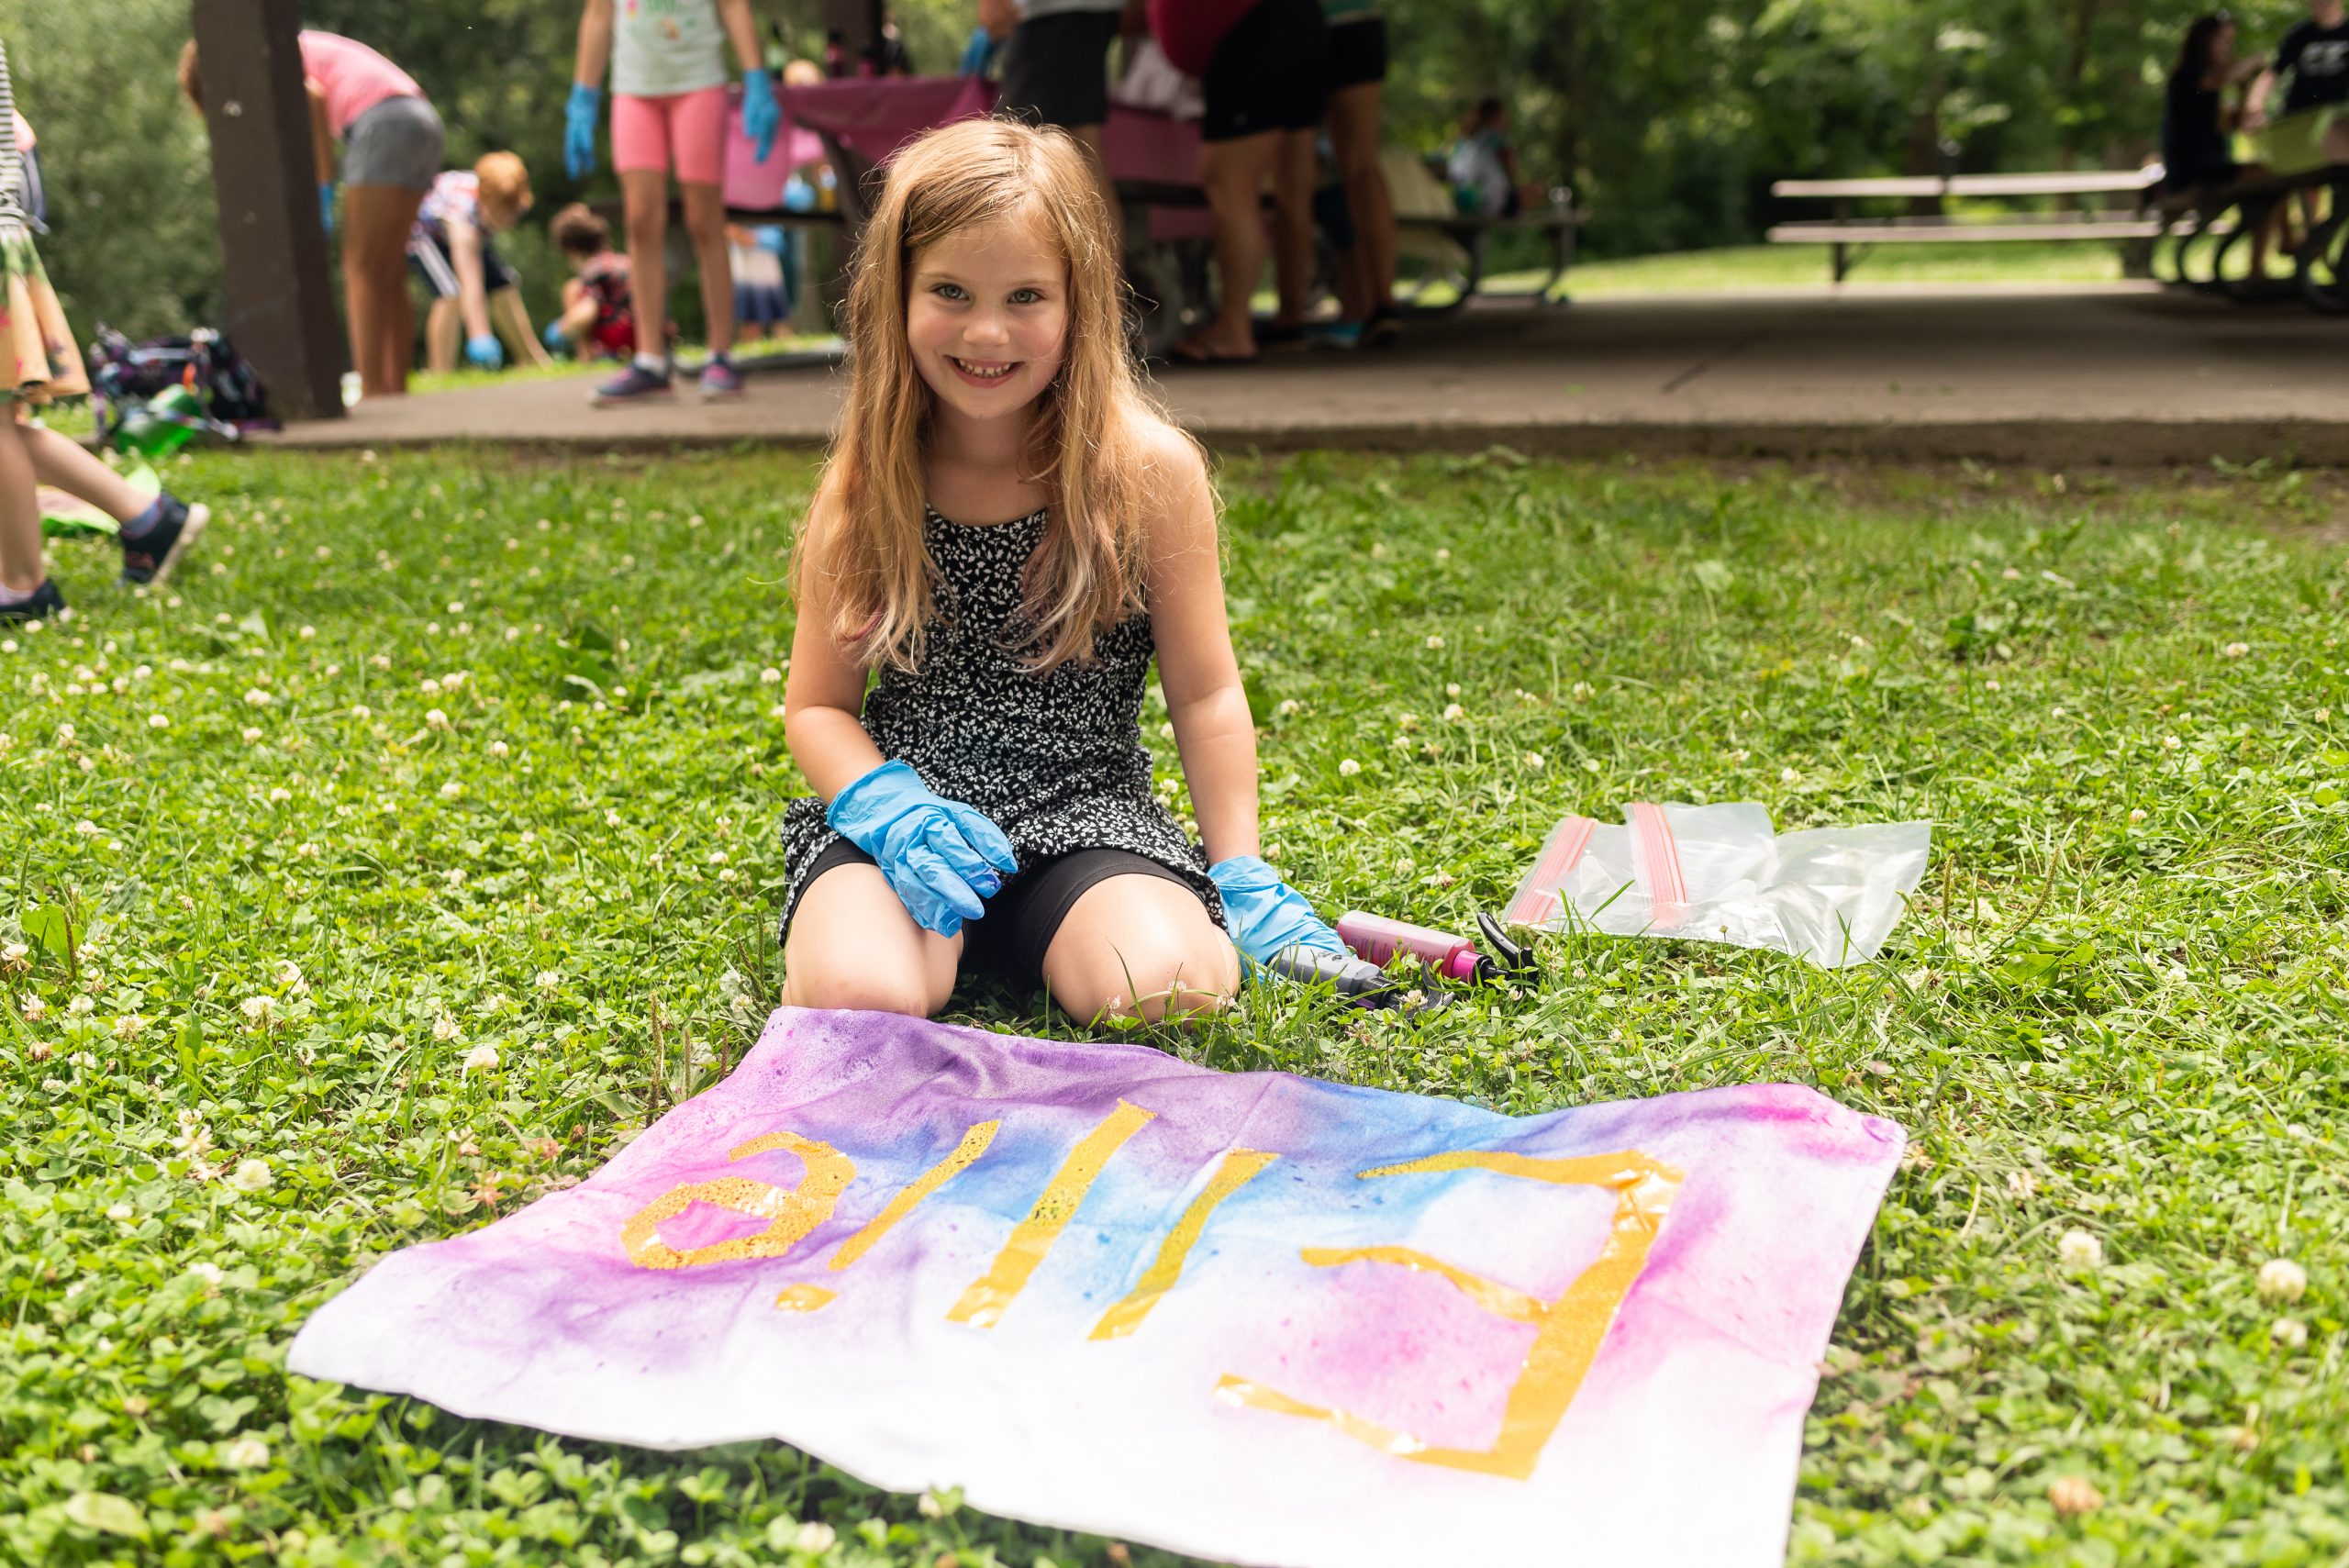 Fairmount Community Library Outdoor Programs and Events in Camillus, Fairmount and Syracuse NY